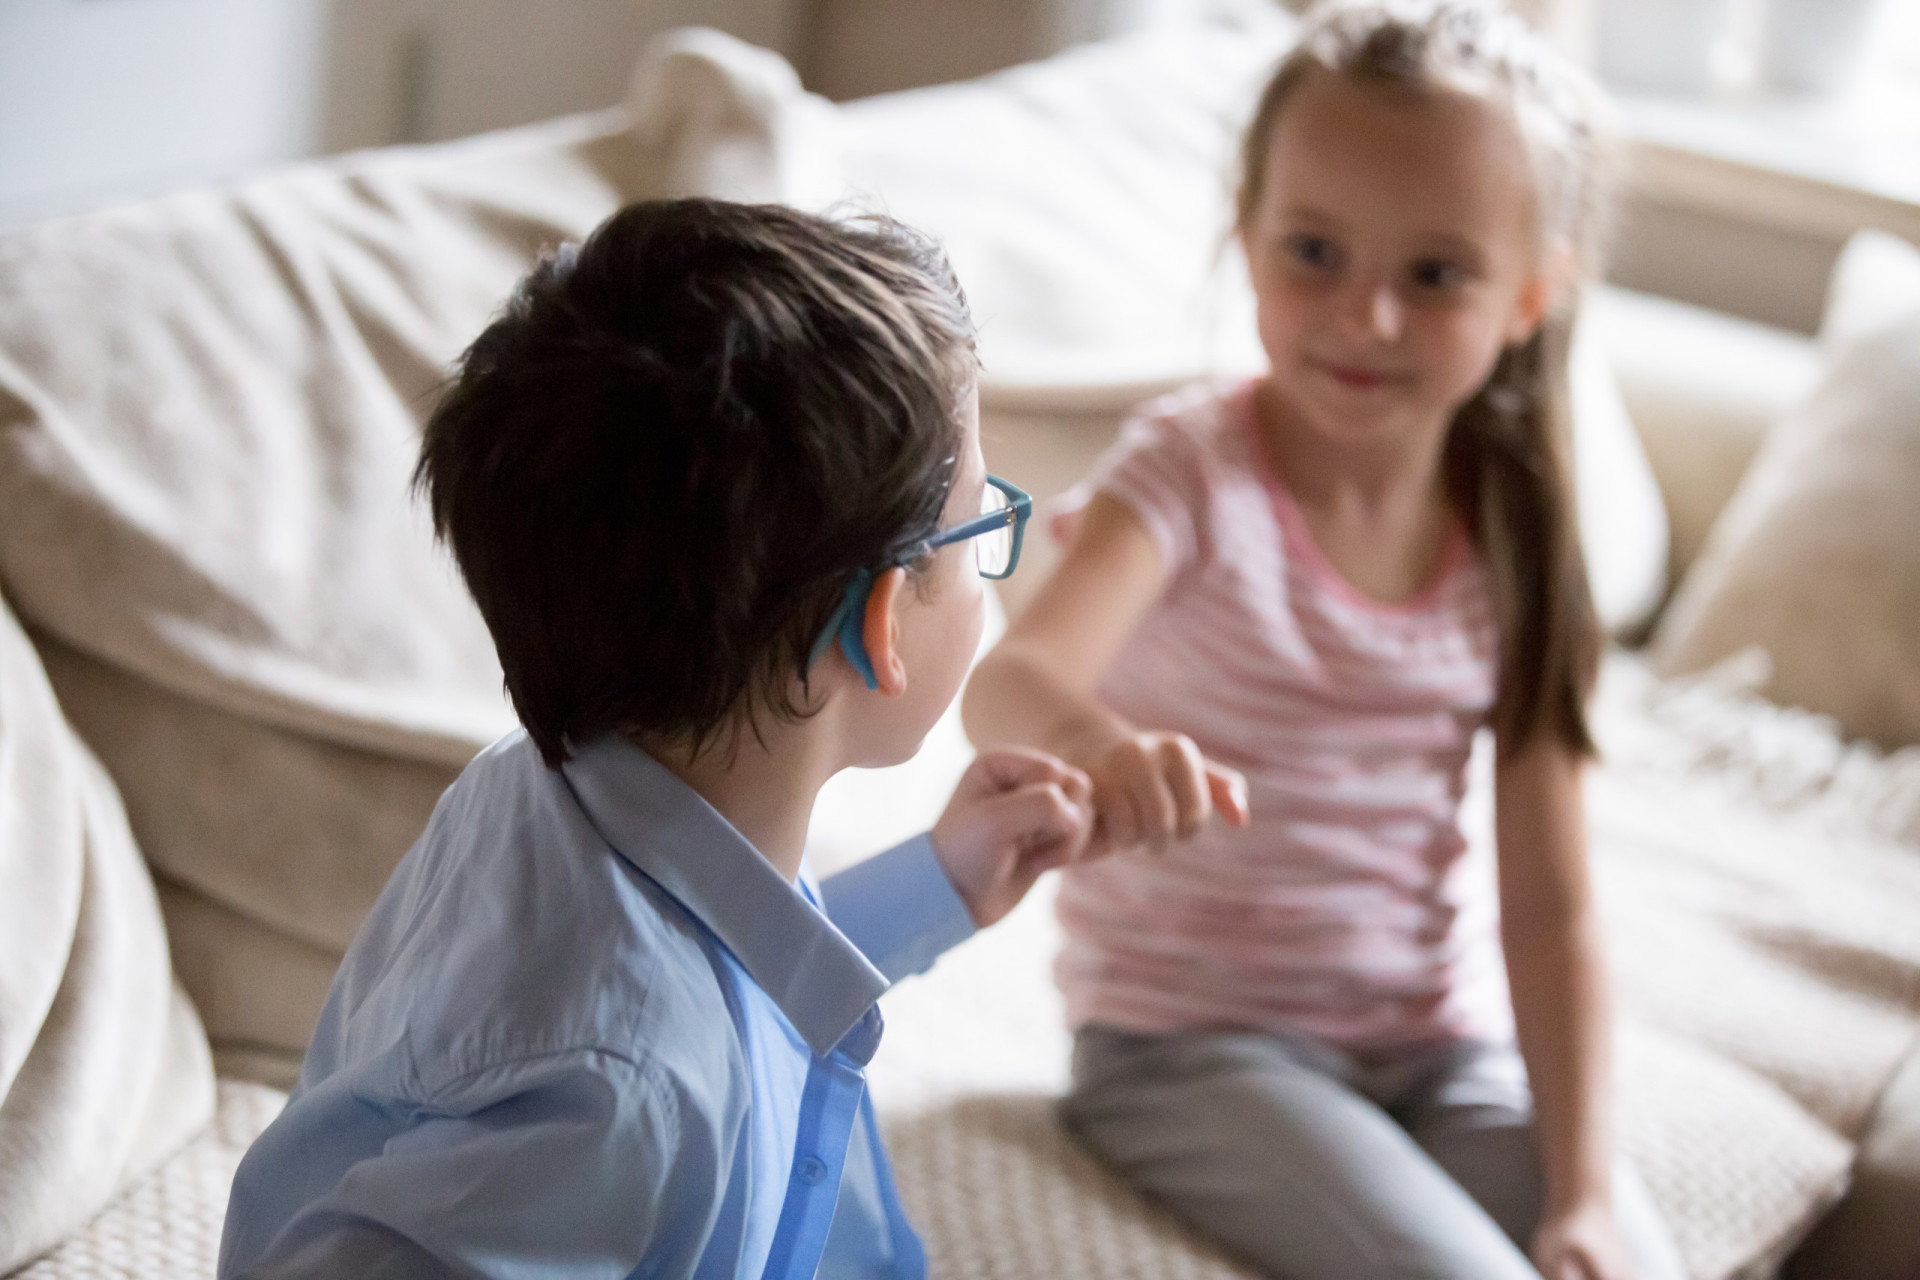 <p>Teaching kids the power of a sincere apology is a valuable life skill. It's about taking responsibility for one's actions and making amends when needed.</p><p><a href="https://www.msn.com/en-us/community/channel/vid-7xx8mnucu55yw63we9va2gwr7uihbxwc68fxqp25x6tg4ftibpra?cvid=94631541bc0f4f89bfd59158d696ad7e">Follow us and access great exclusive content every day</a></p>